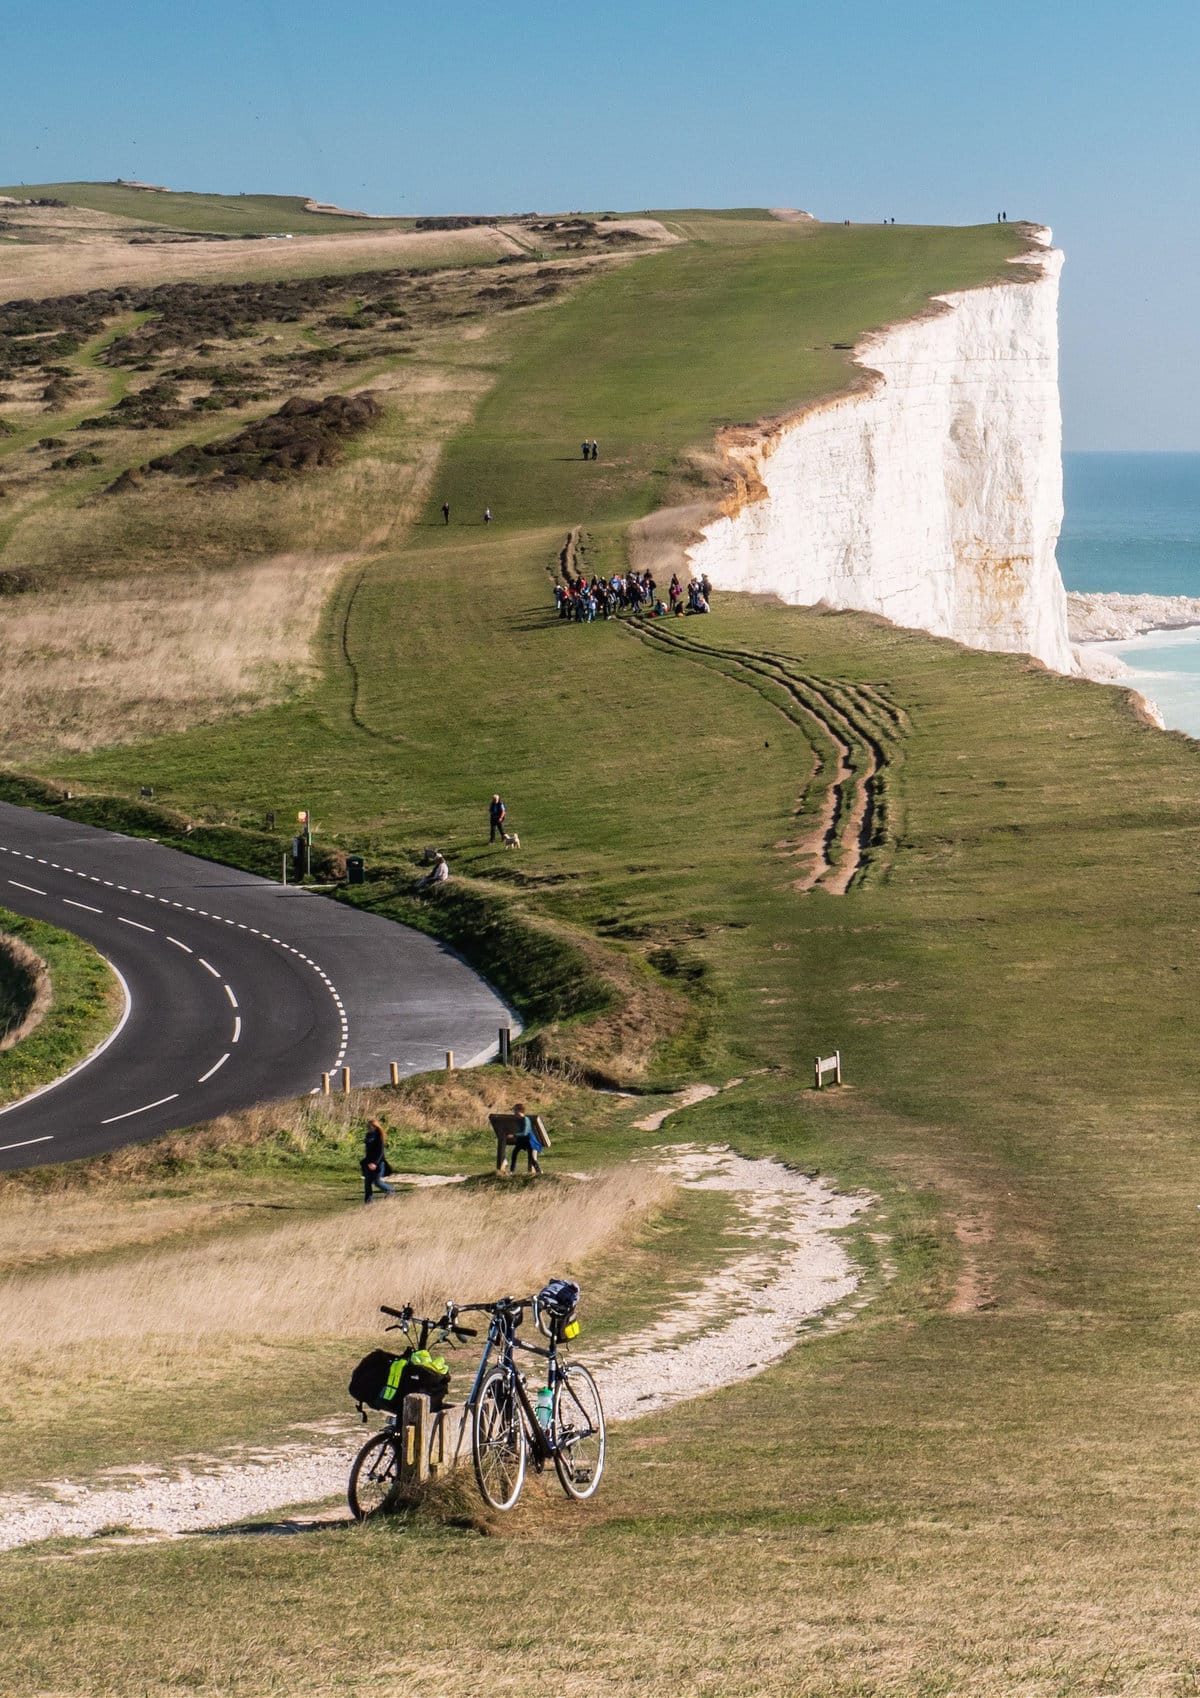 Cyclists along the hills of South Downs